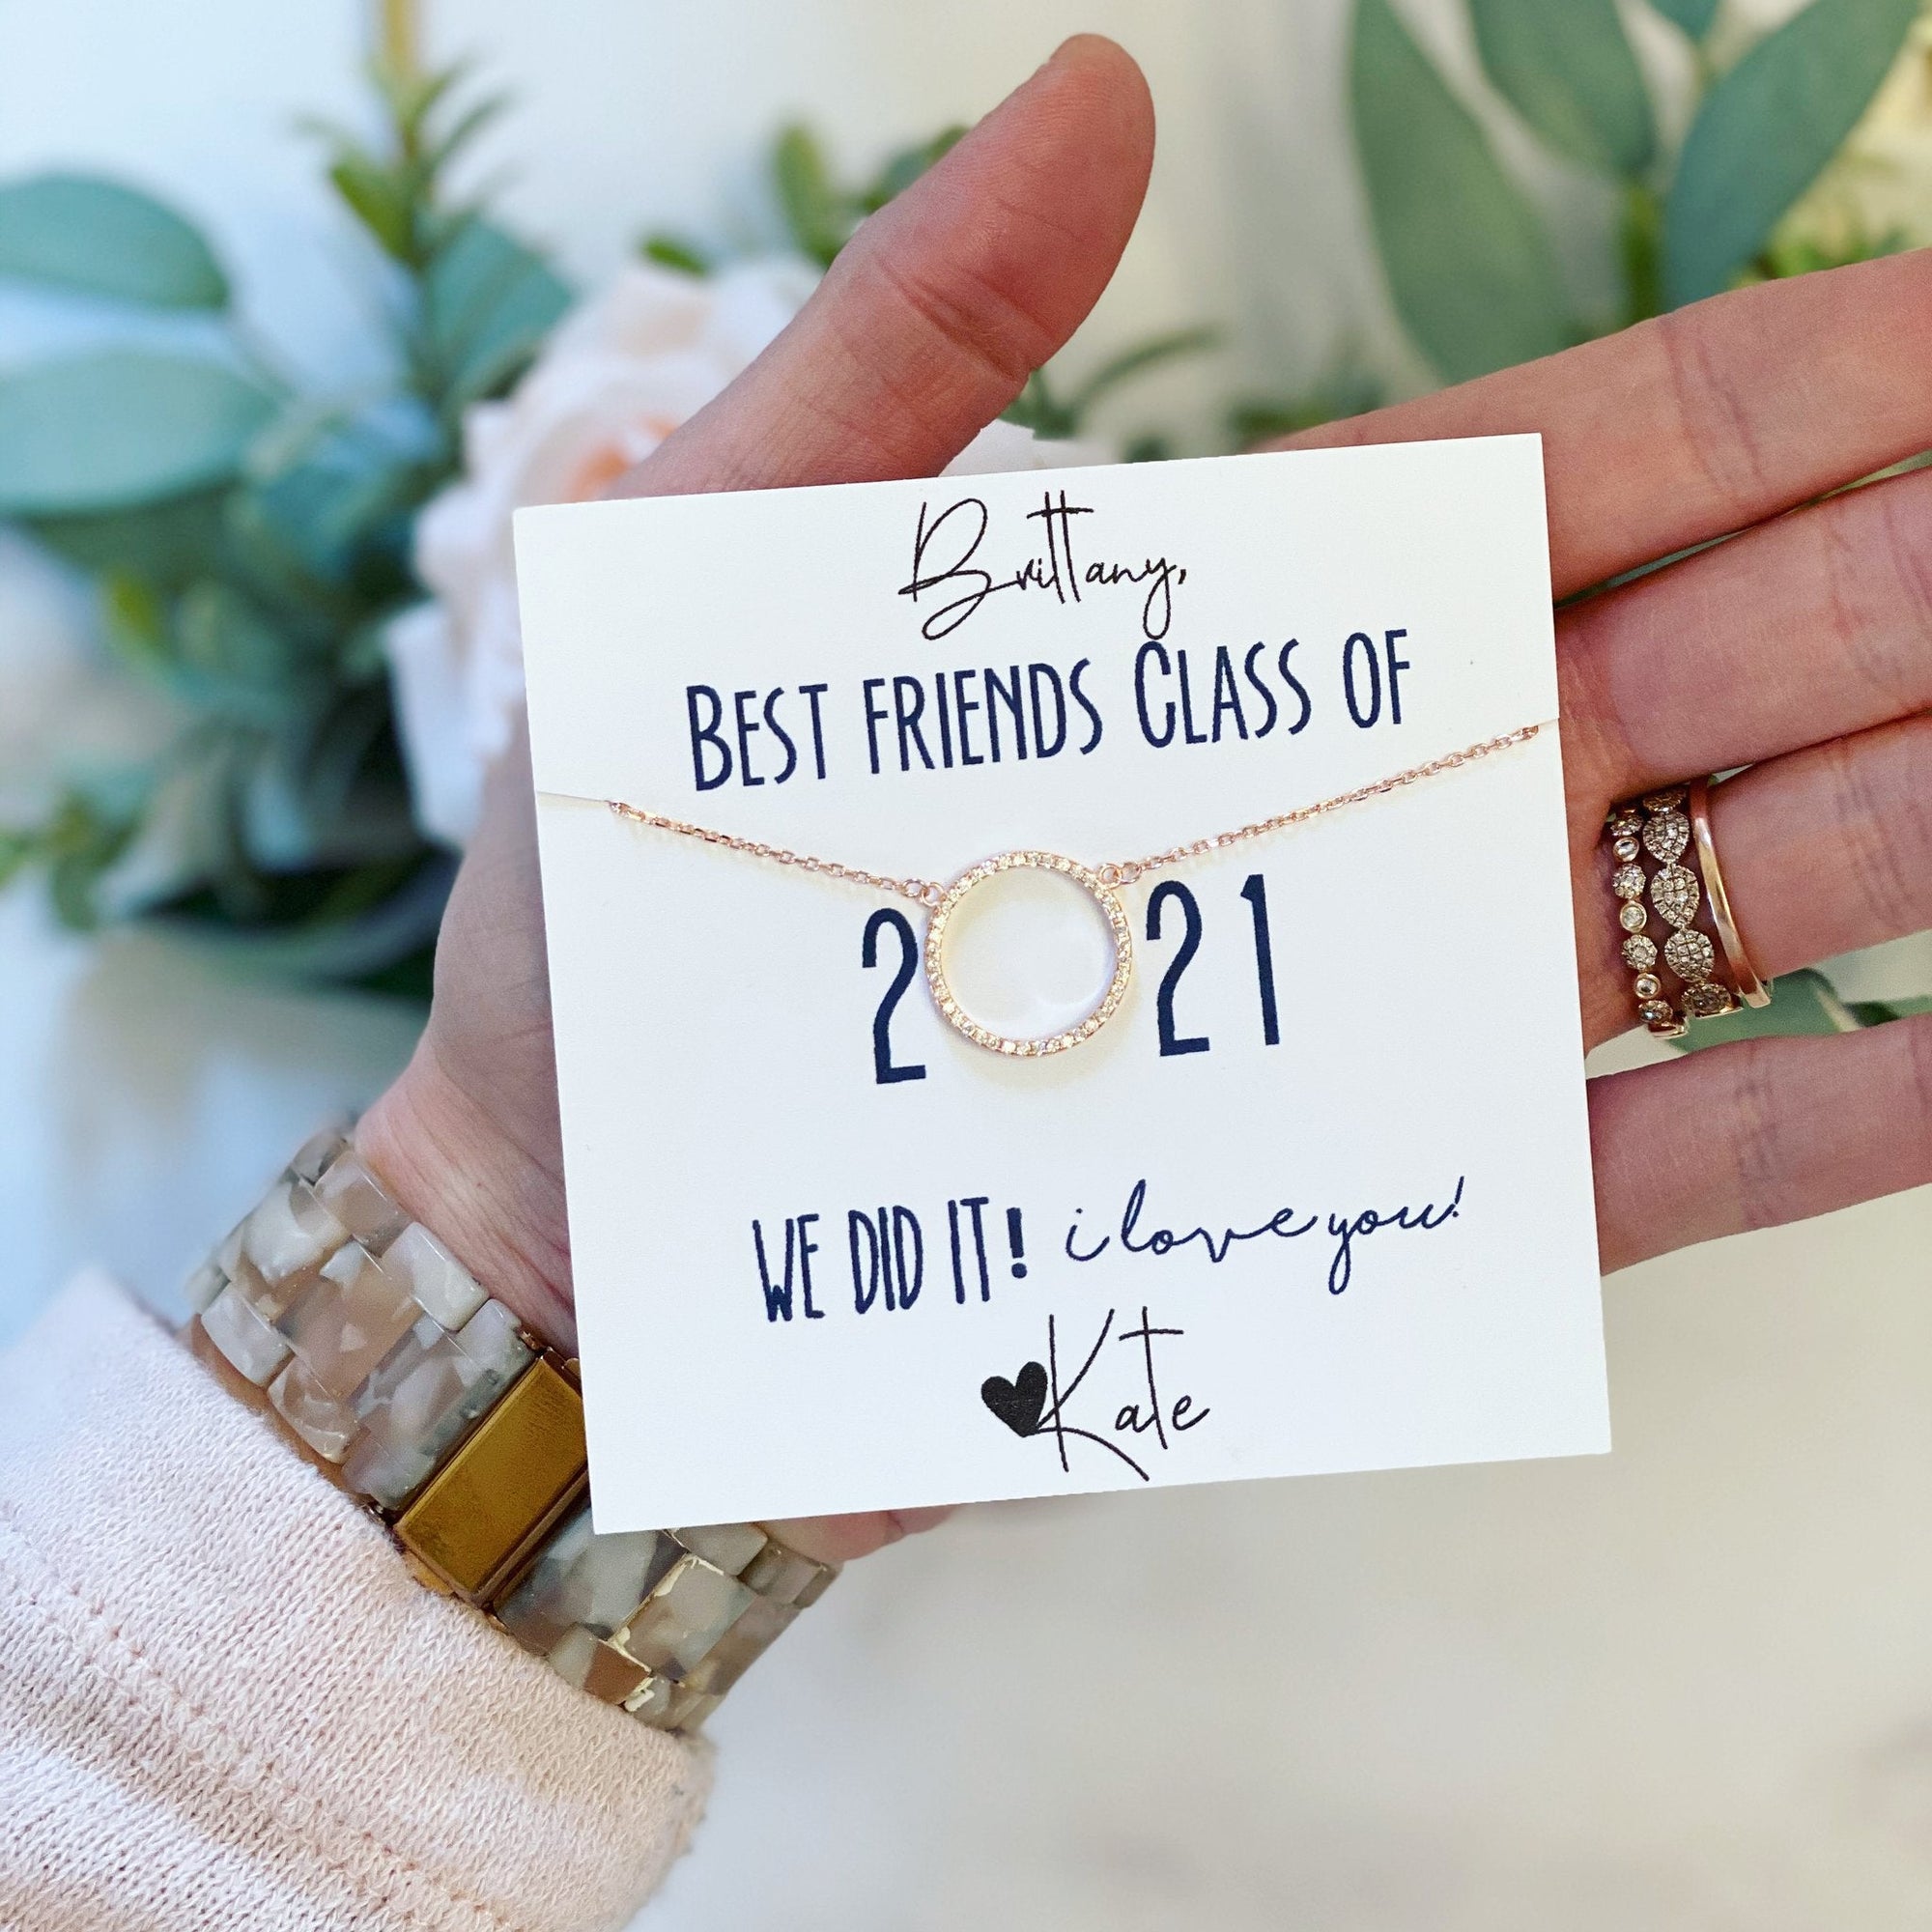 Best Friends Gifts! Best friends gift ideas any girl will love! Find cool,  unique and fun gift … | Birthday presents for teens, Best friend gifts,  Gifts for friends